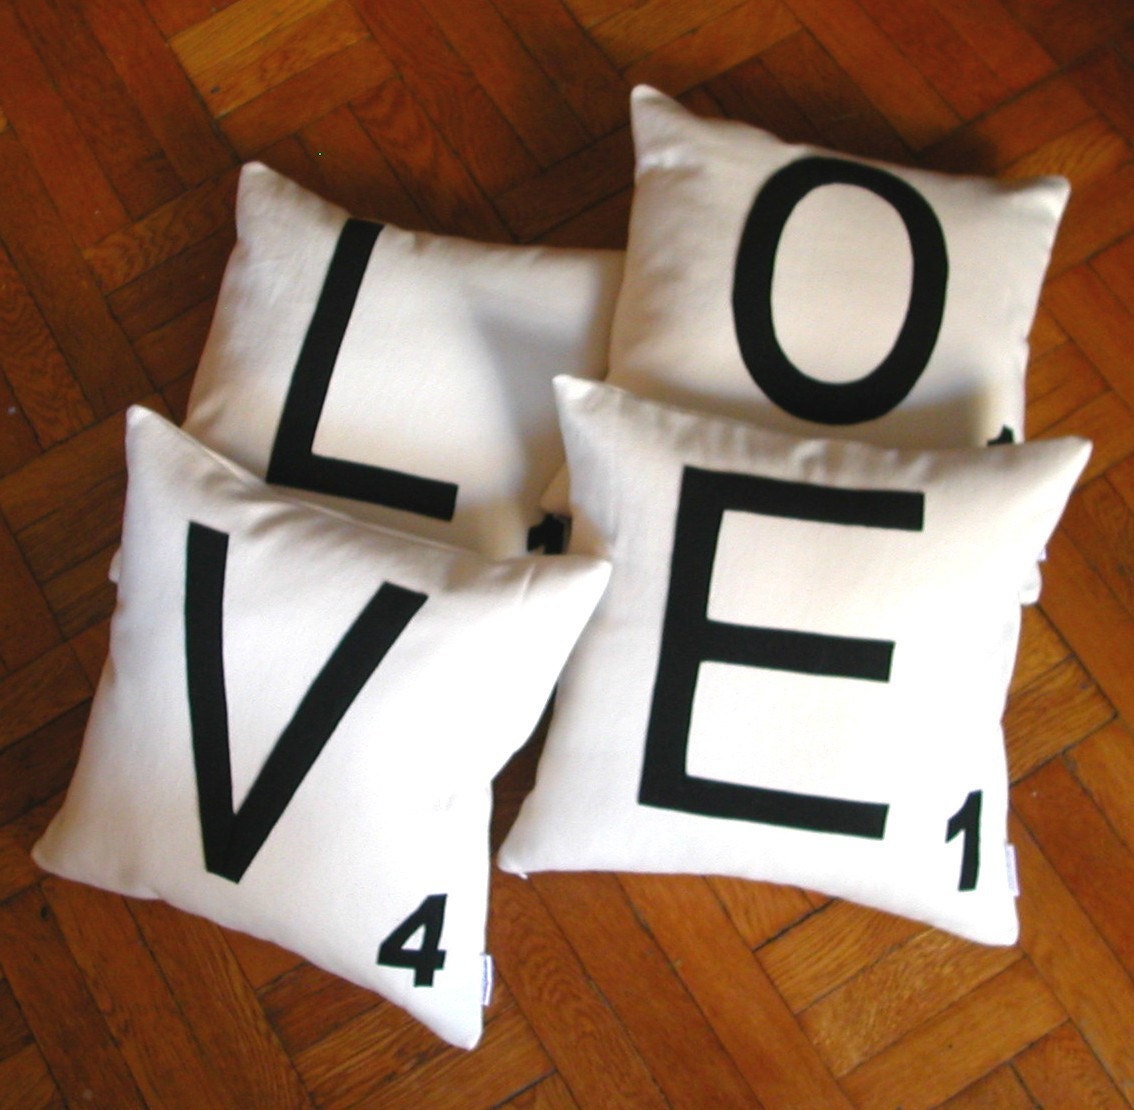 Any 4 Canvas Scrabble Letter Pillow COVERS, Letter Cushion COVERS, Felt Pillows - LOVE Pillow Covers or  any 4 letters